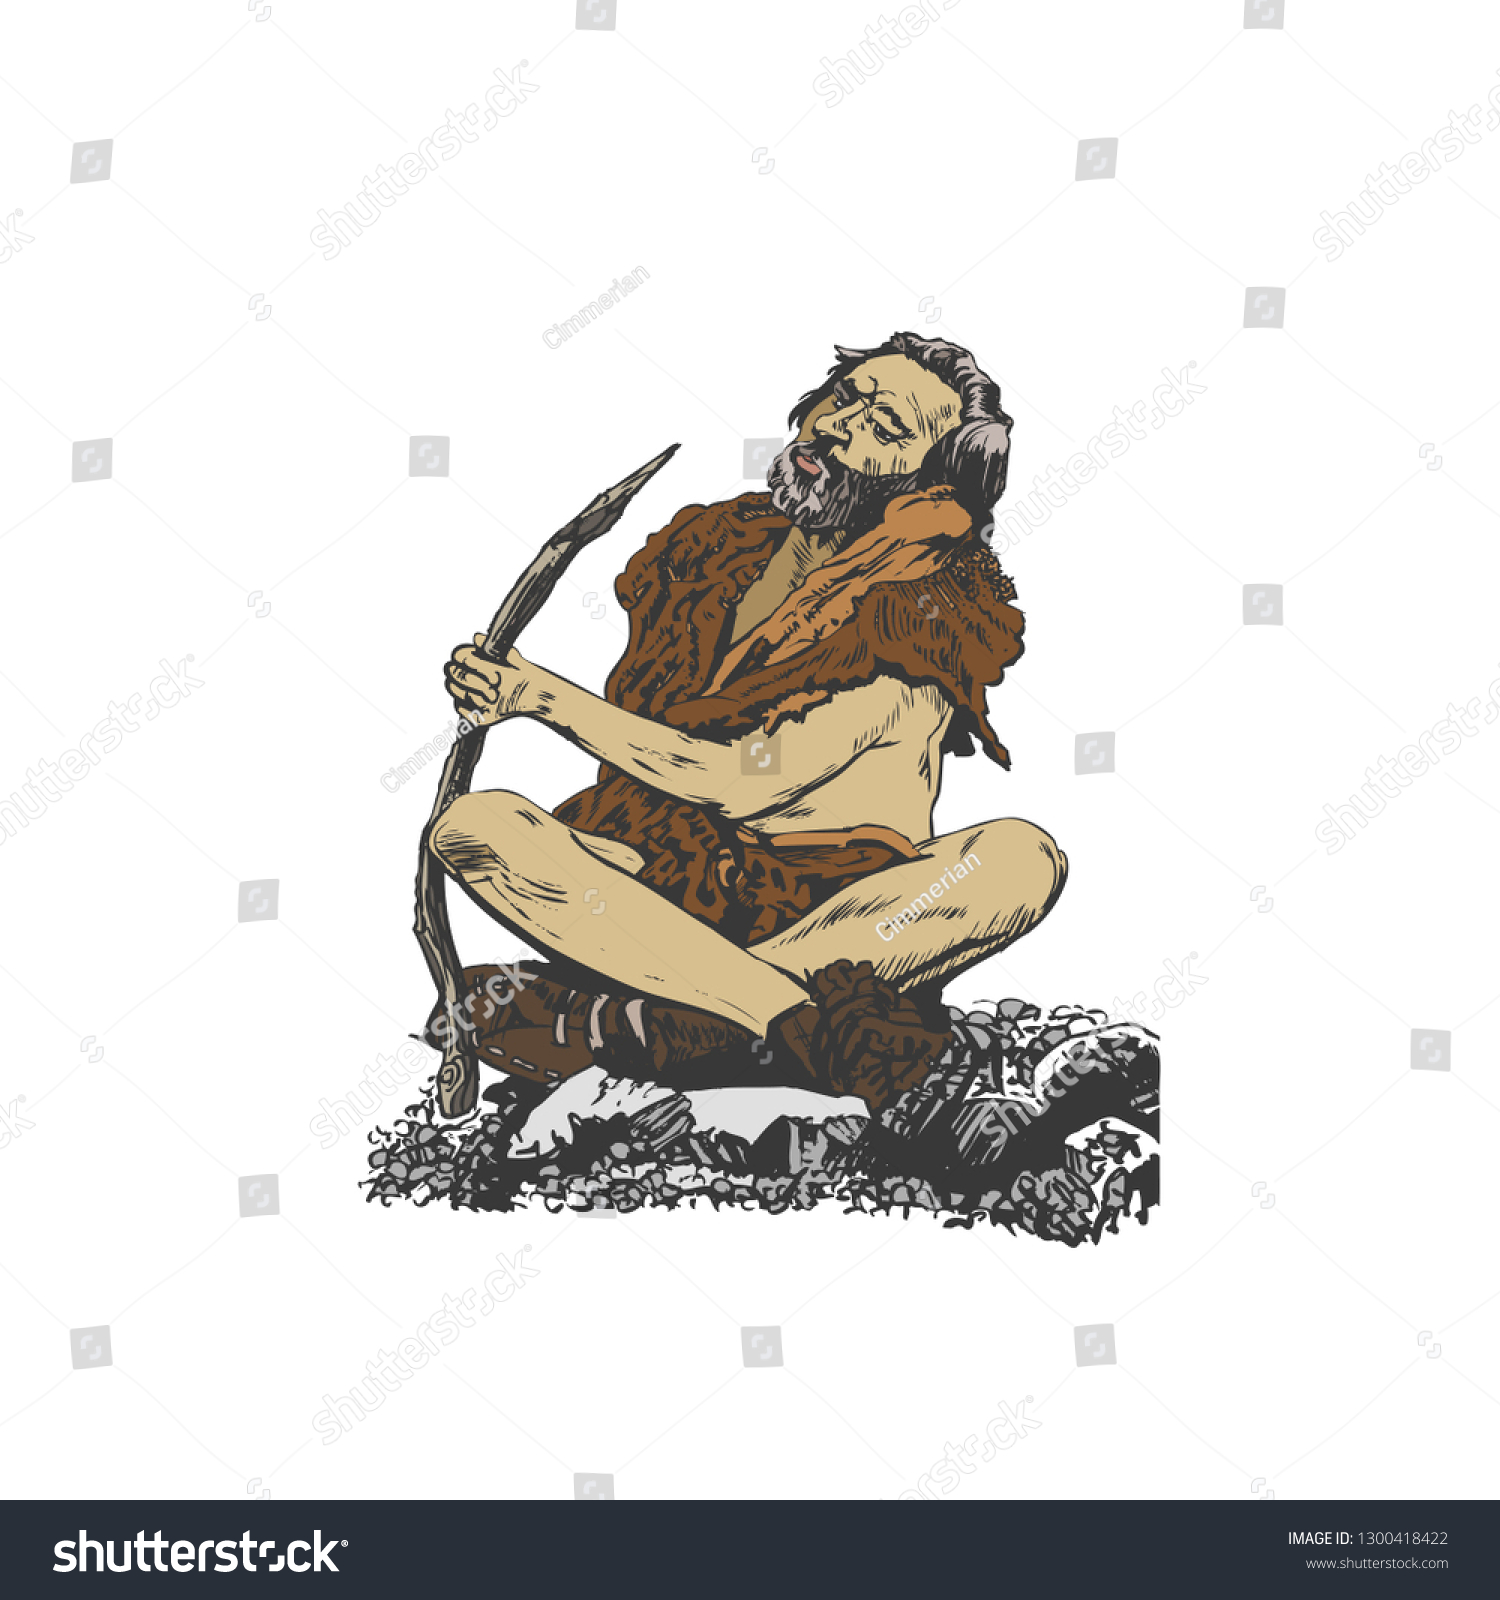 SVG of Cro-Magnon at work. Vector illustration. In the same portfolio there is a monochrome image. svg